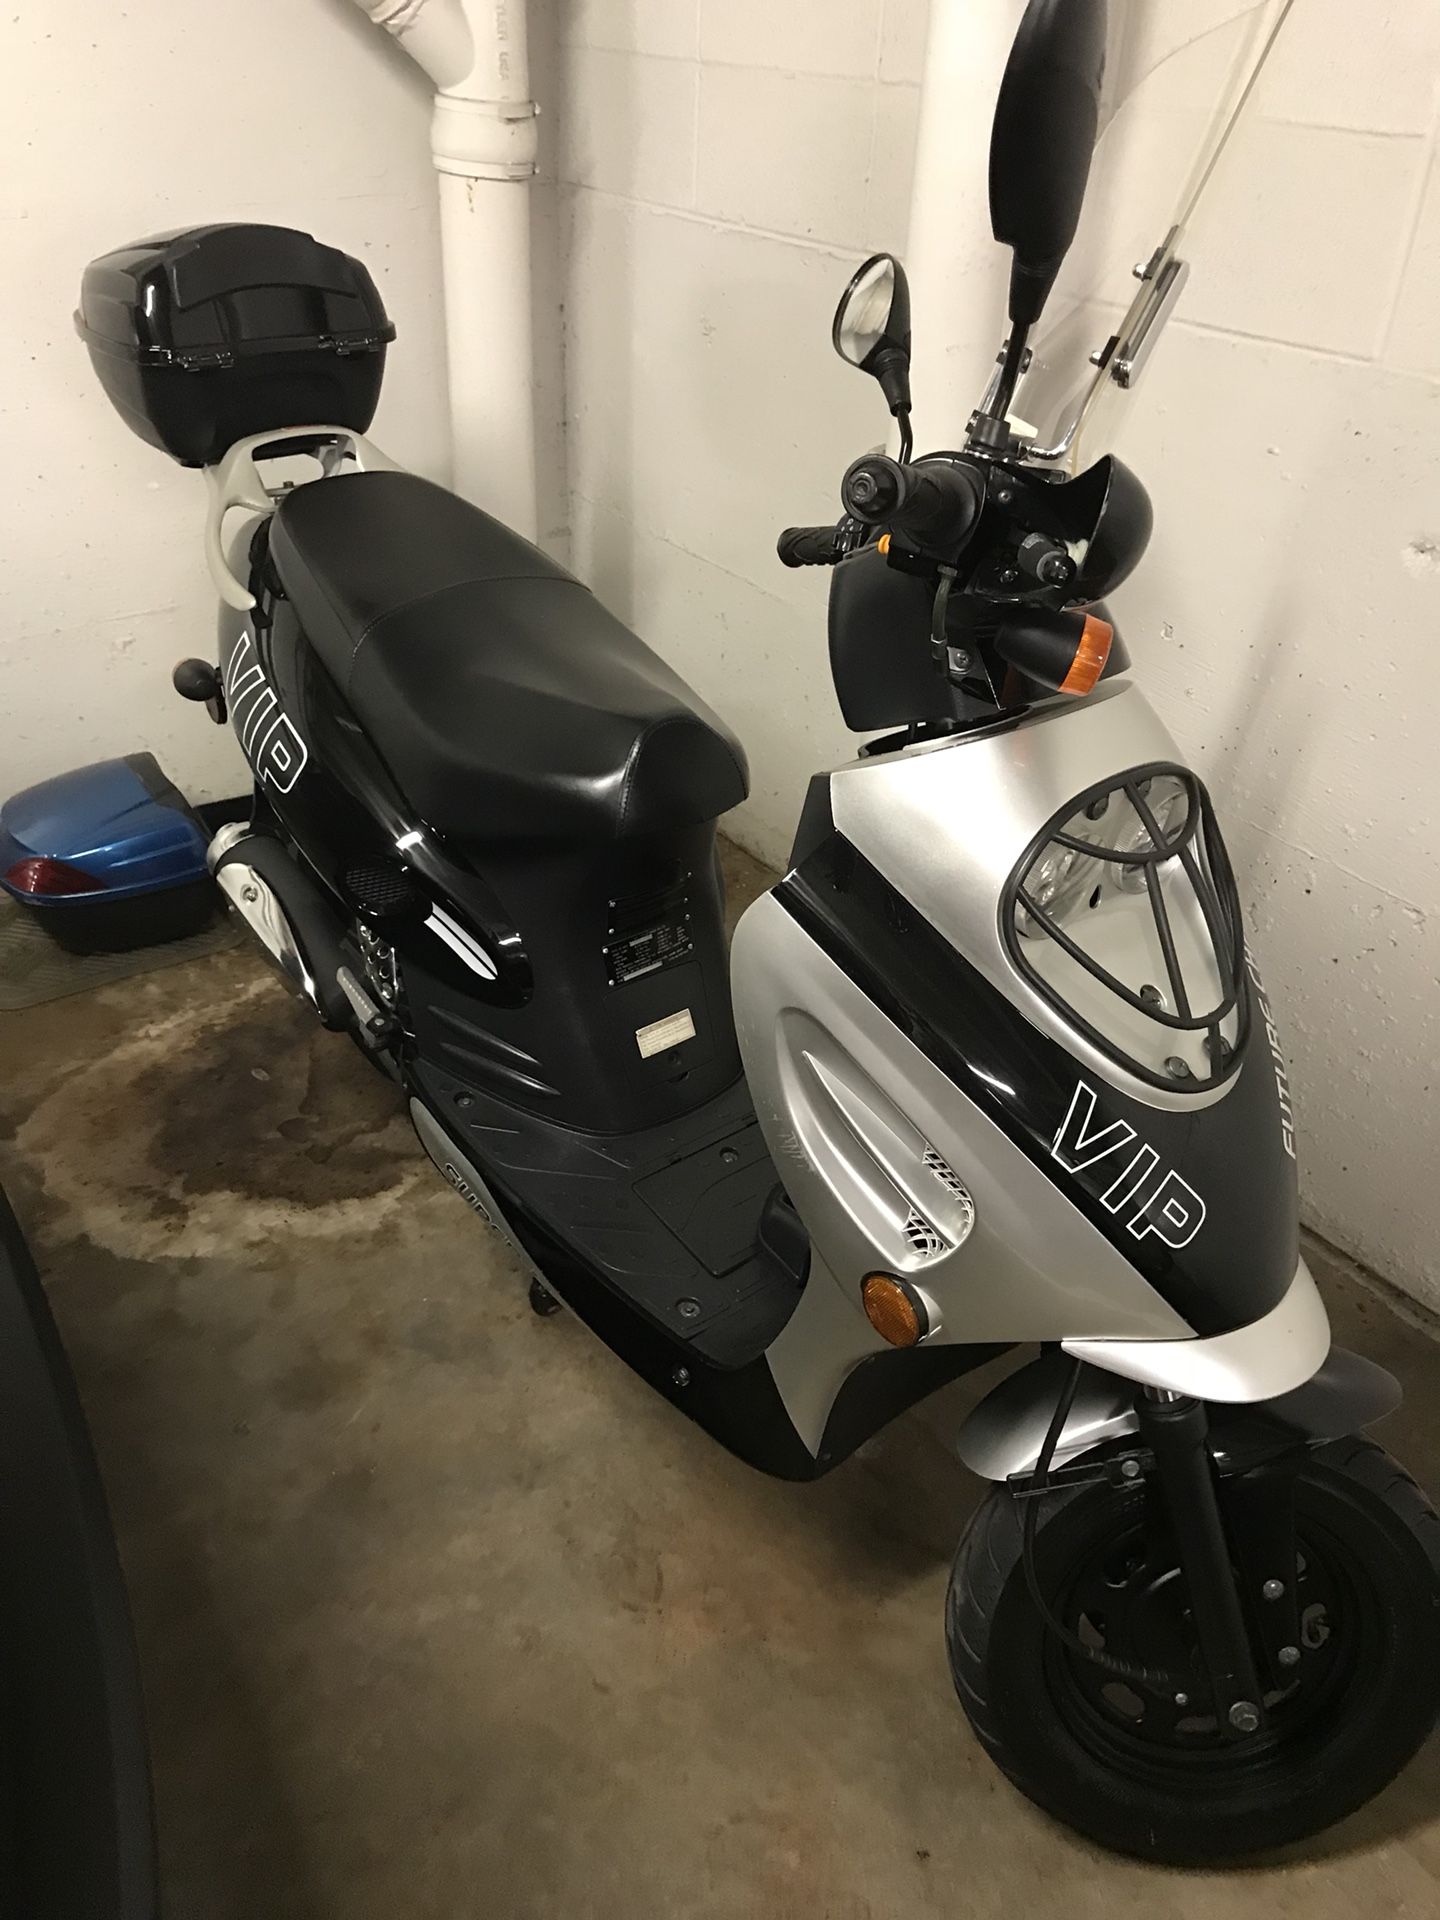 Moped for sale - mileage is in one of the photos